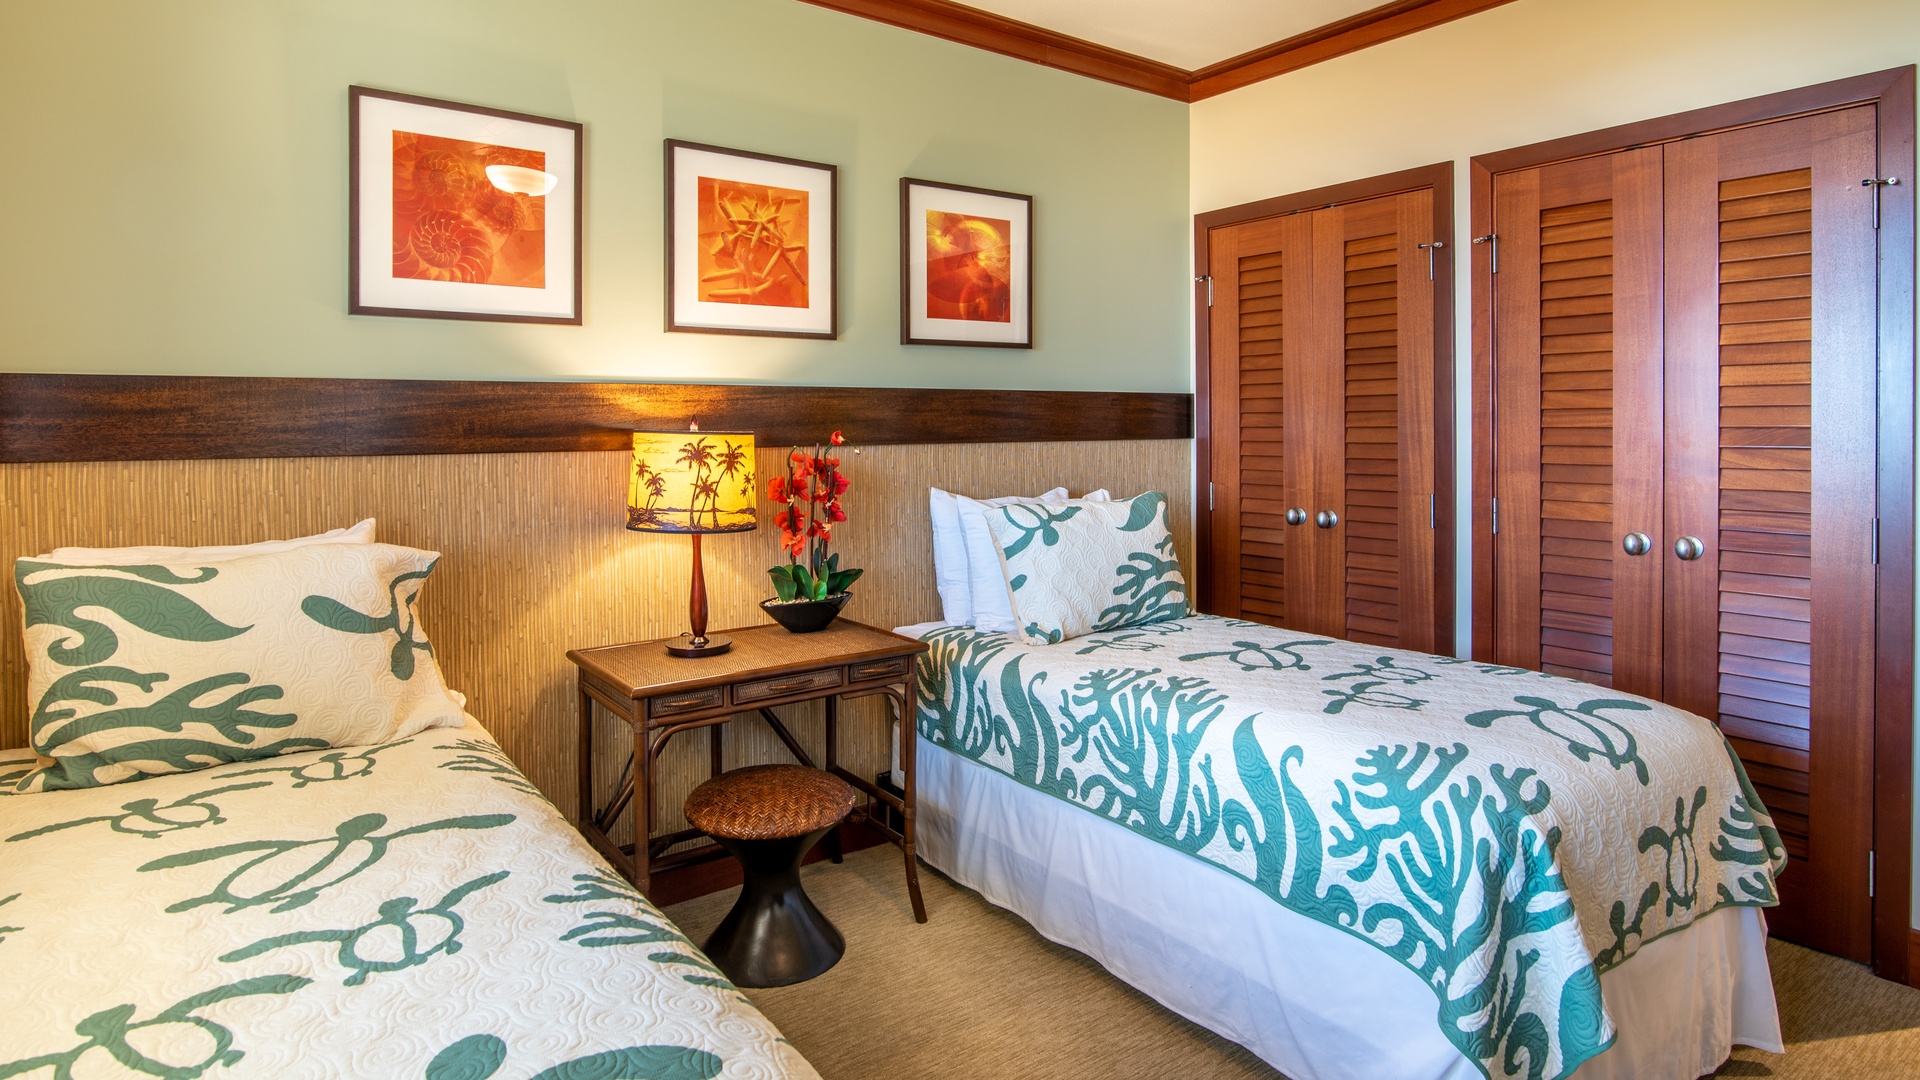 Kapolei Vacation Rentals, Ko Olina Beach Villas B901 - The third guest bedroom features brightly patterned twin beds.